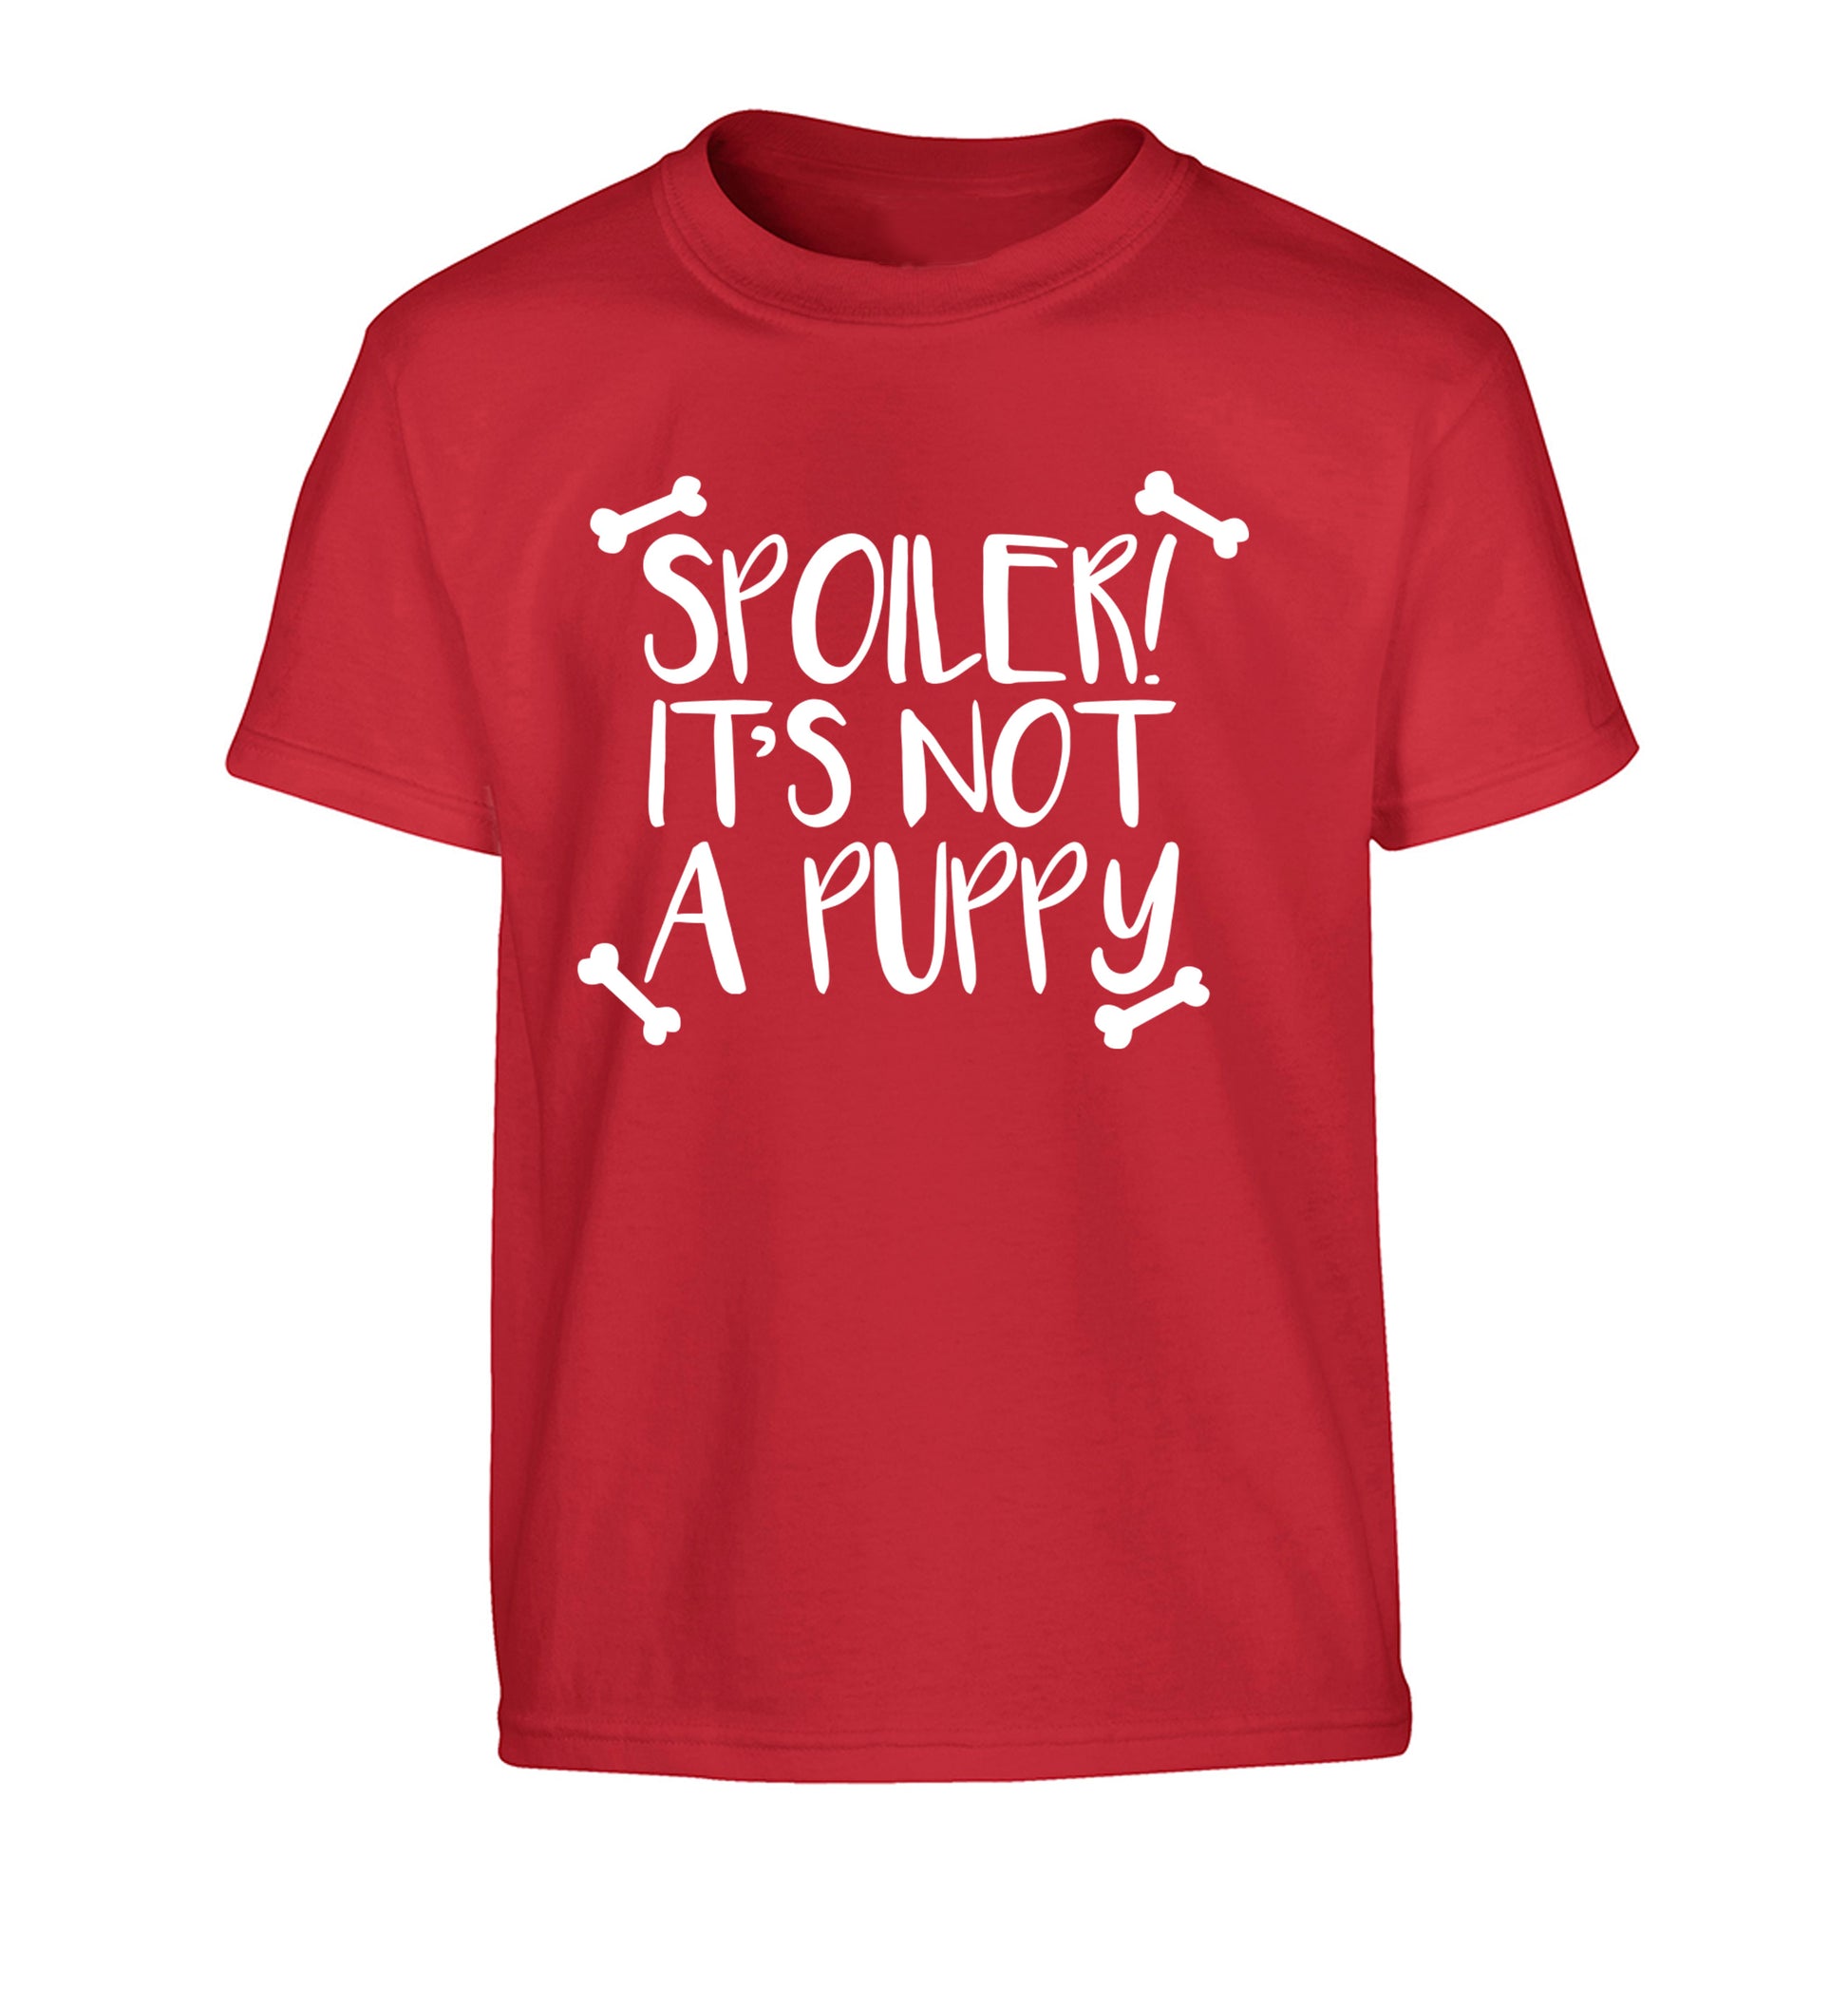 Spoiler it's not a puppy Children's red Tshirt 12-13 Years